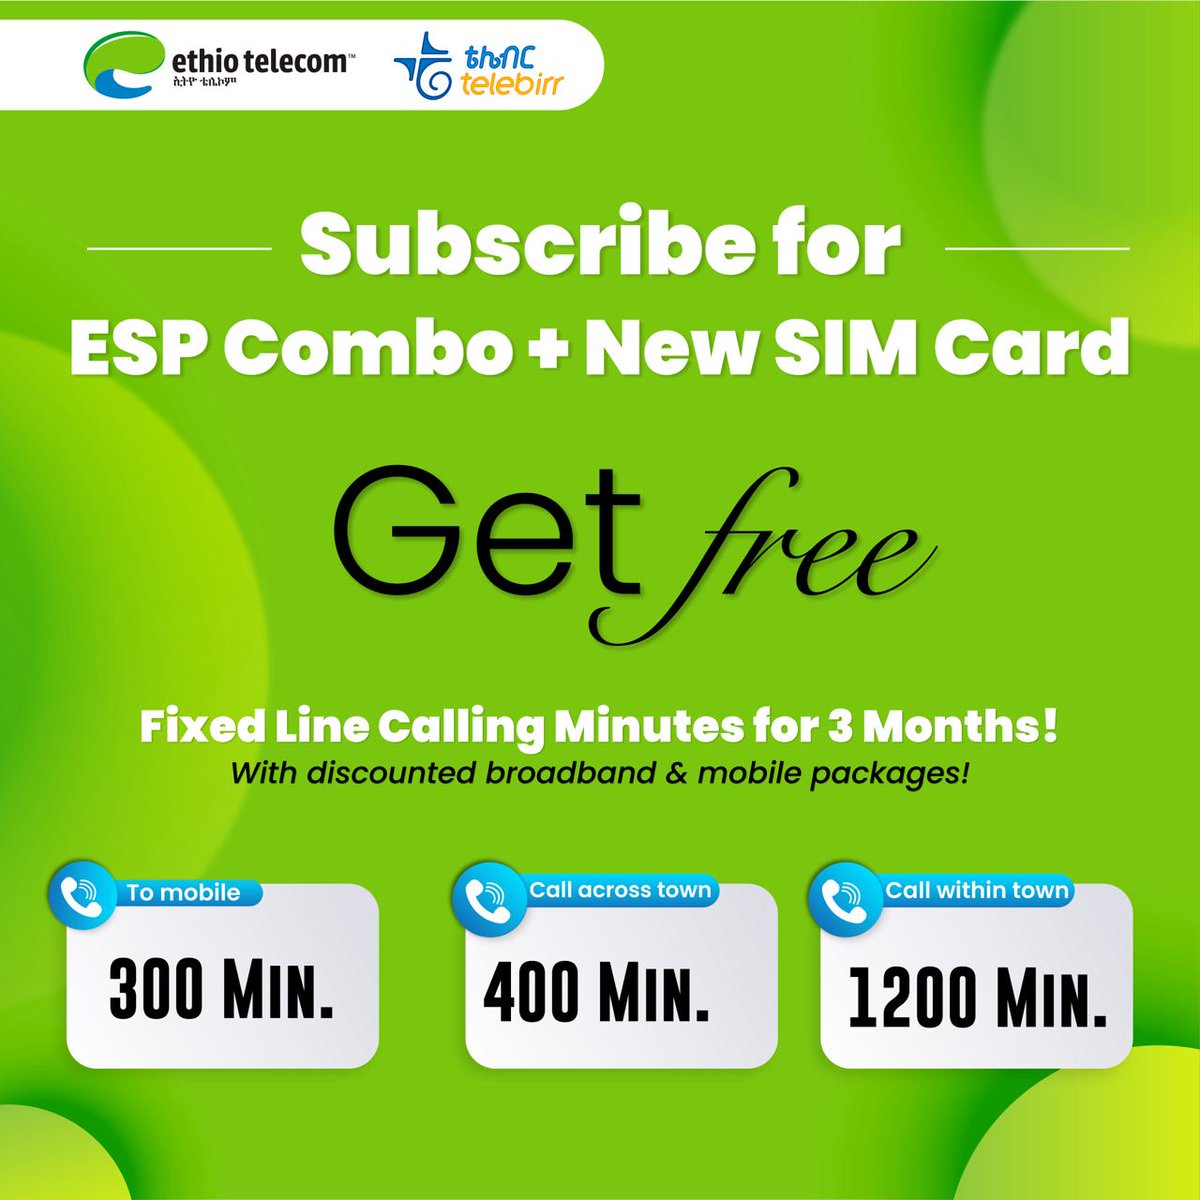 Subscribe to our fixed broadband internet service, and with a new SIM card, get an incredible 20% discount. Choose our combo service to enjoy free calls for three months. Alternatively, if you prefer, purchase only a SIM card and receive a 20% discount on the mobile package.